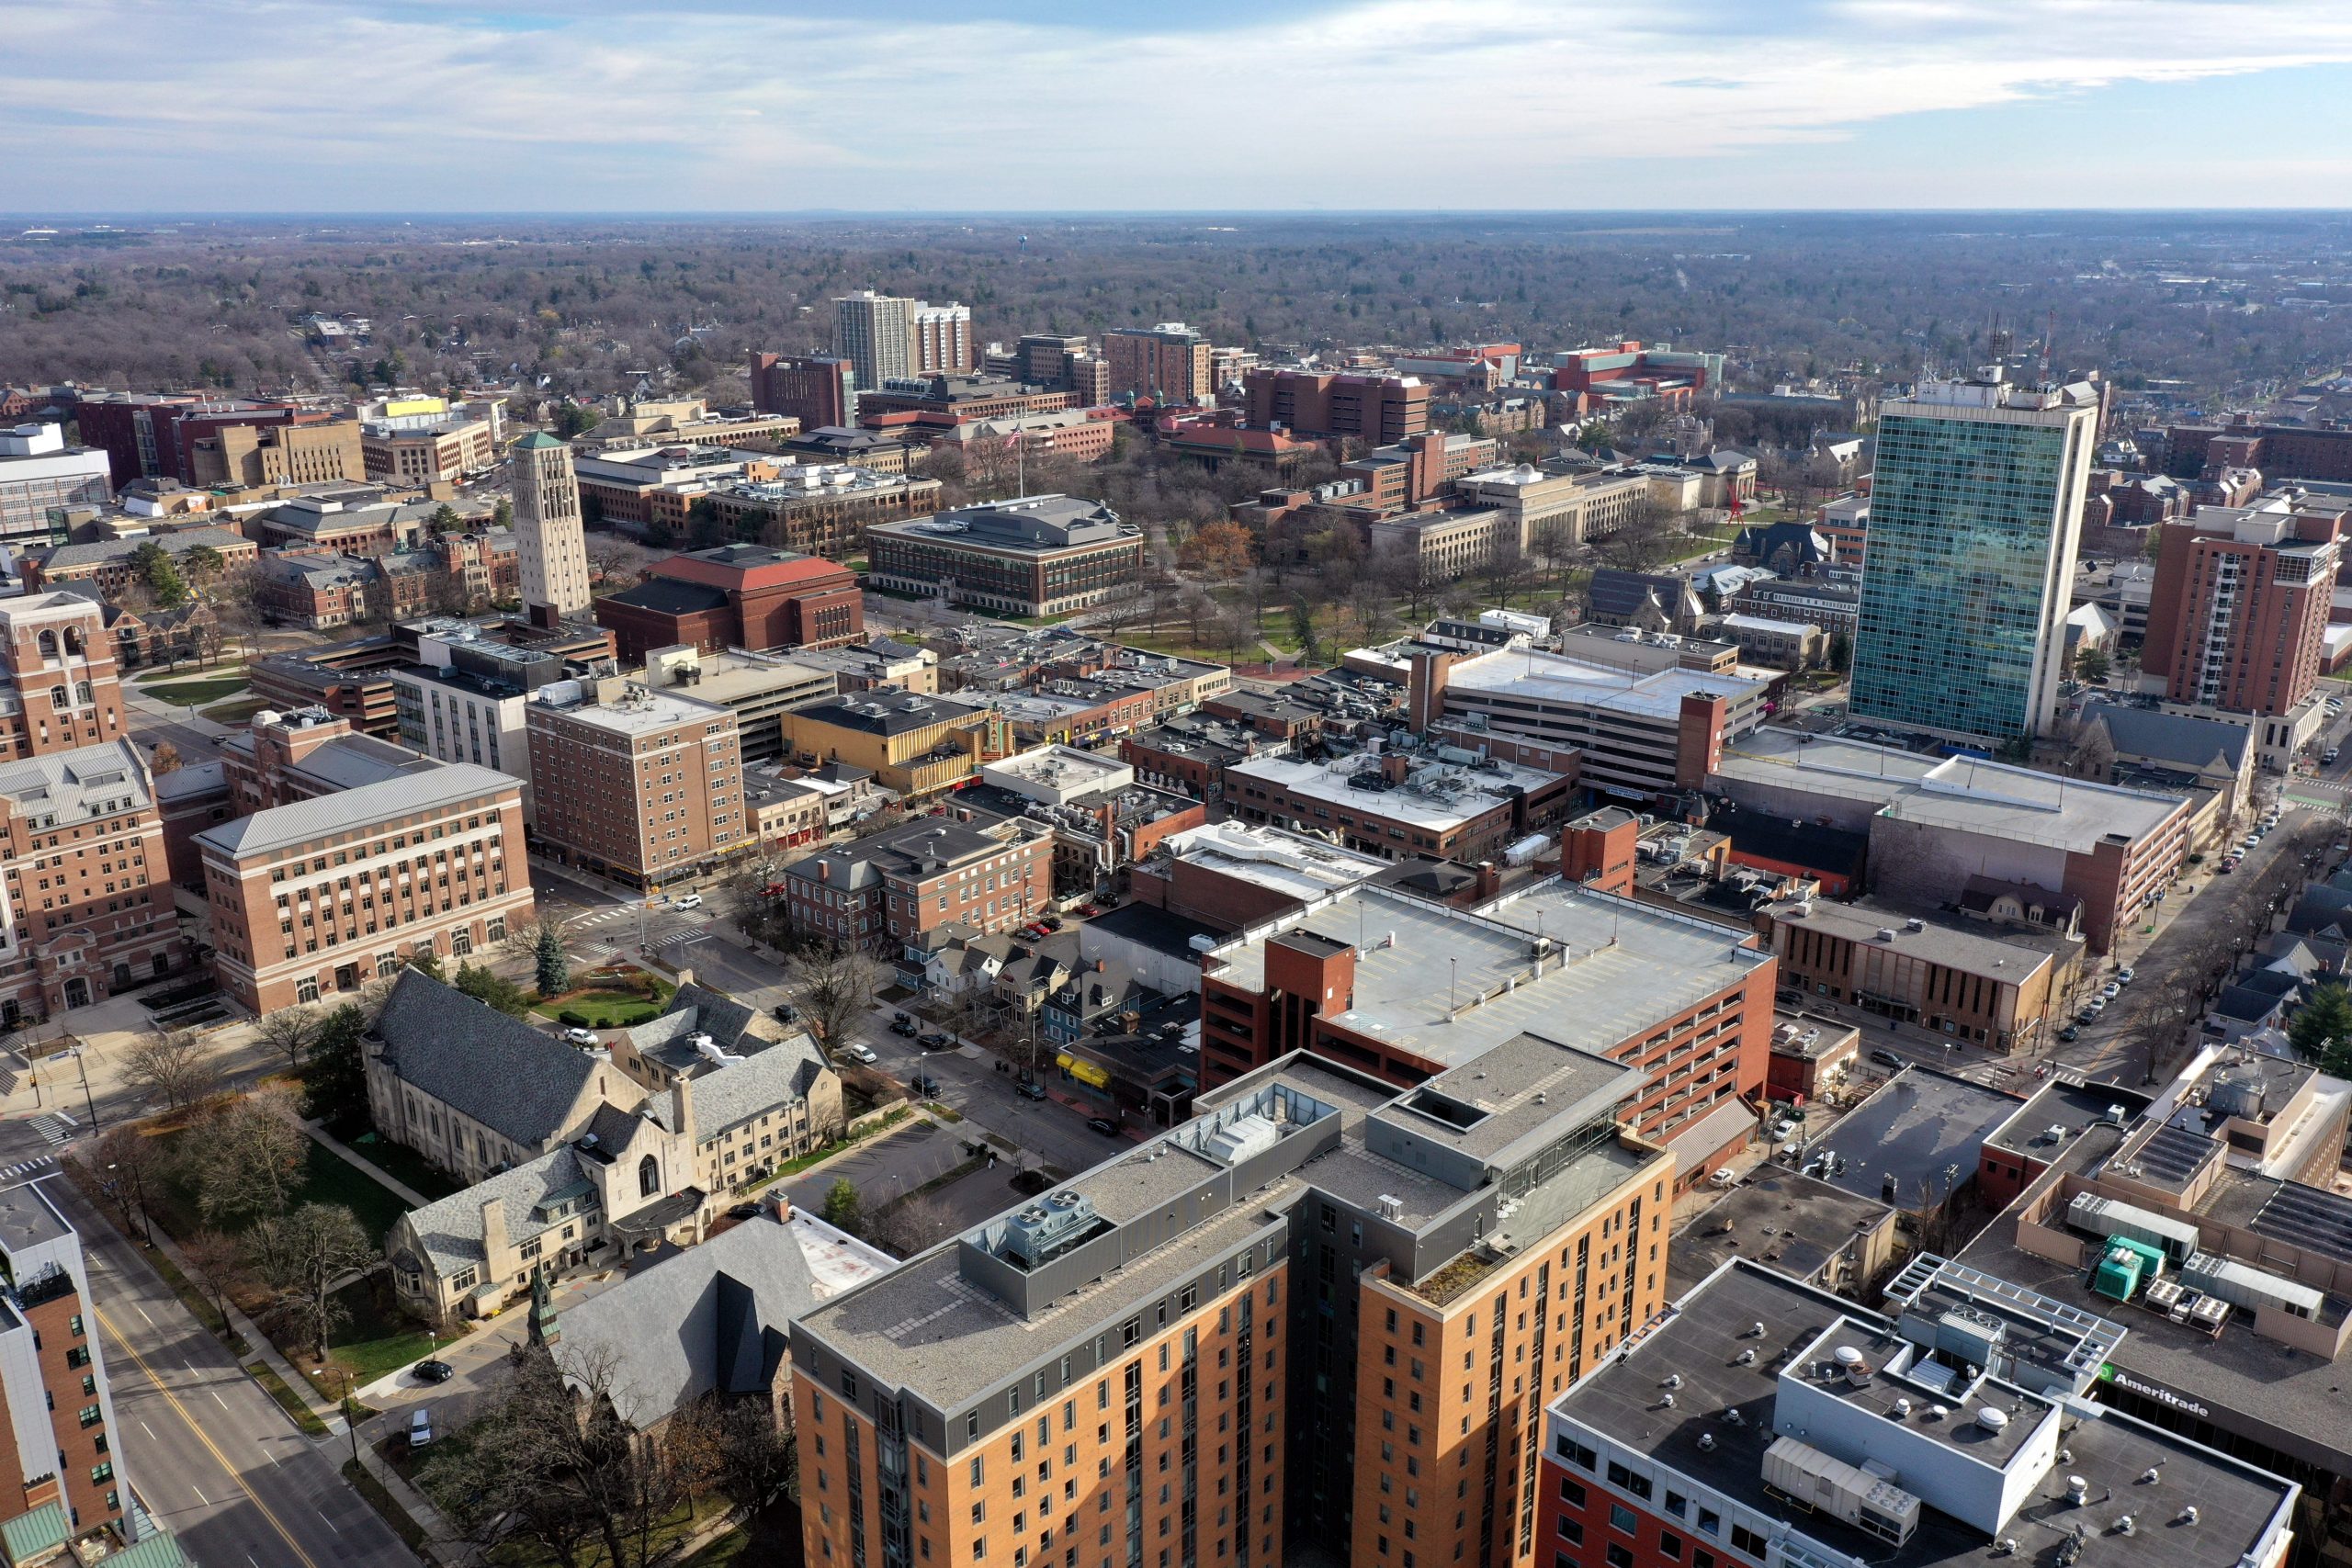 Study says Ann Arbor is the most-educated city in the U.S. [Video]